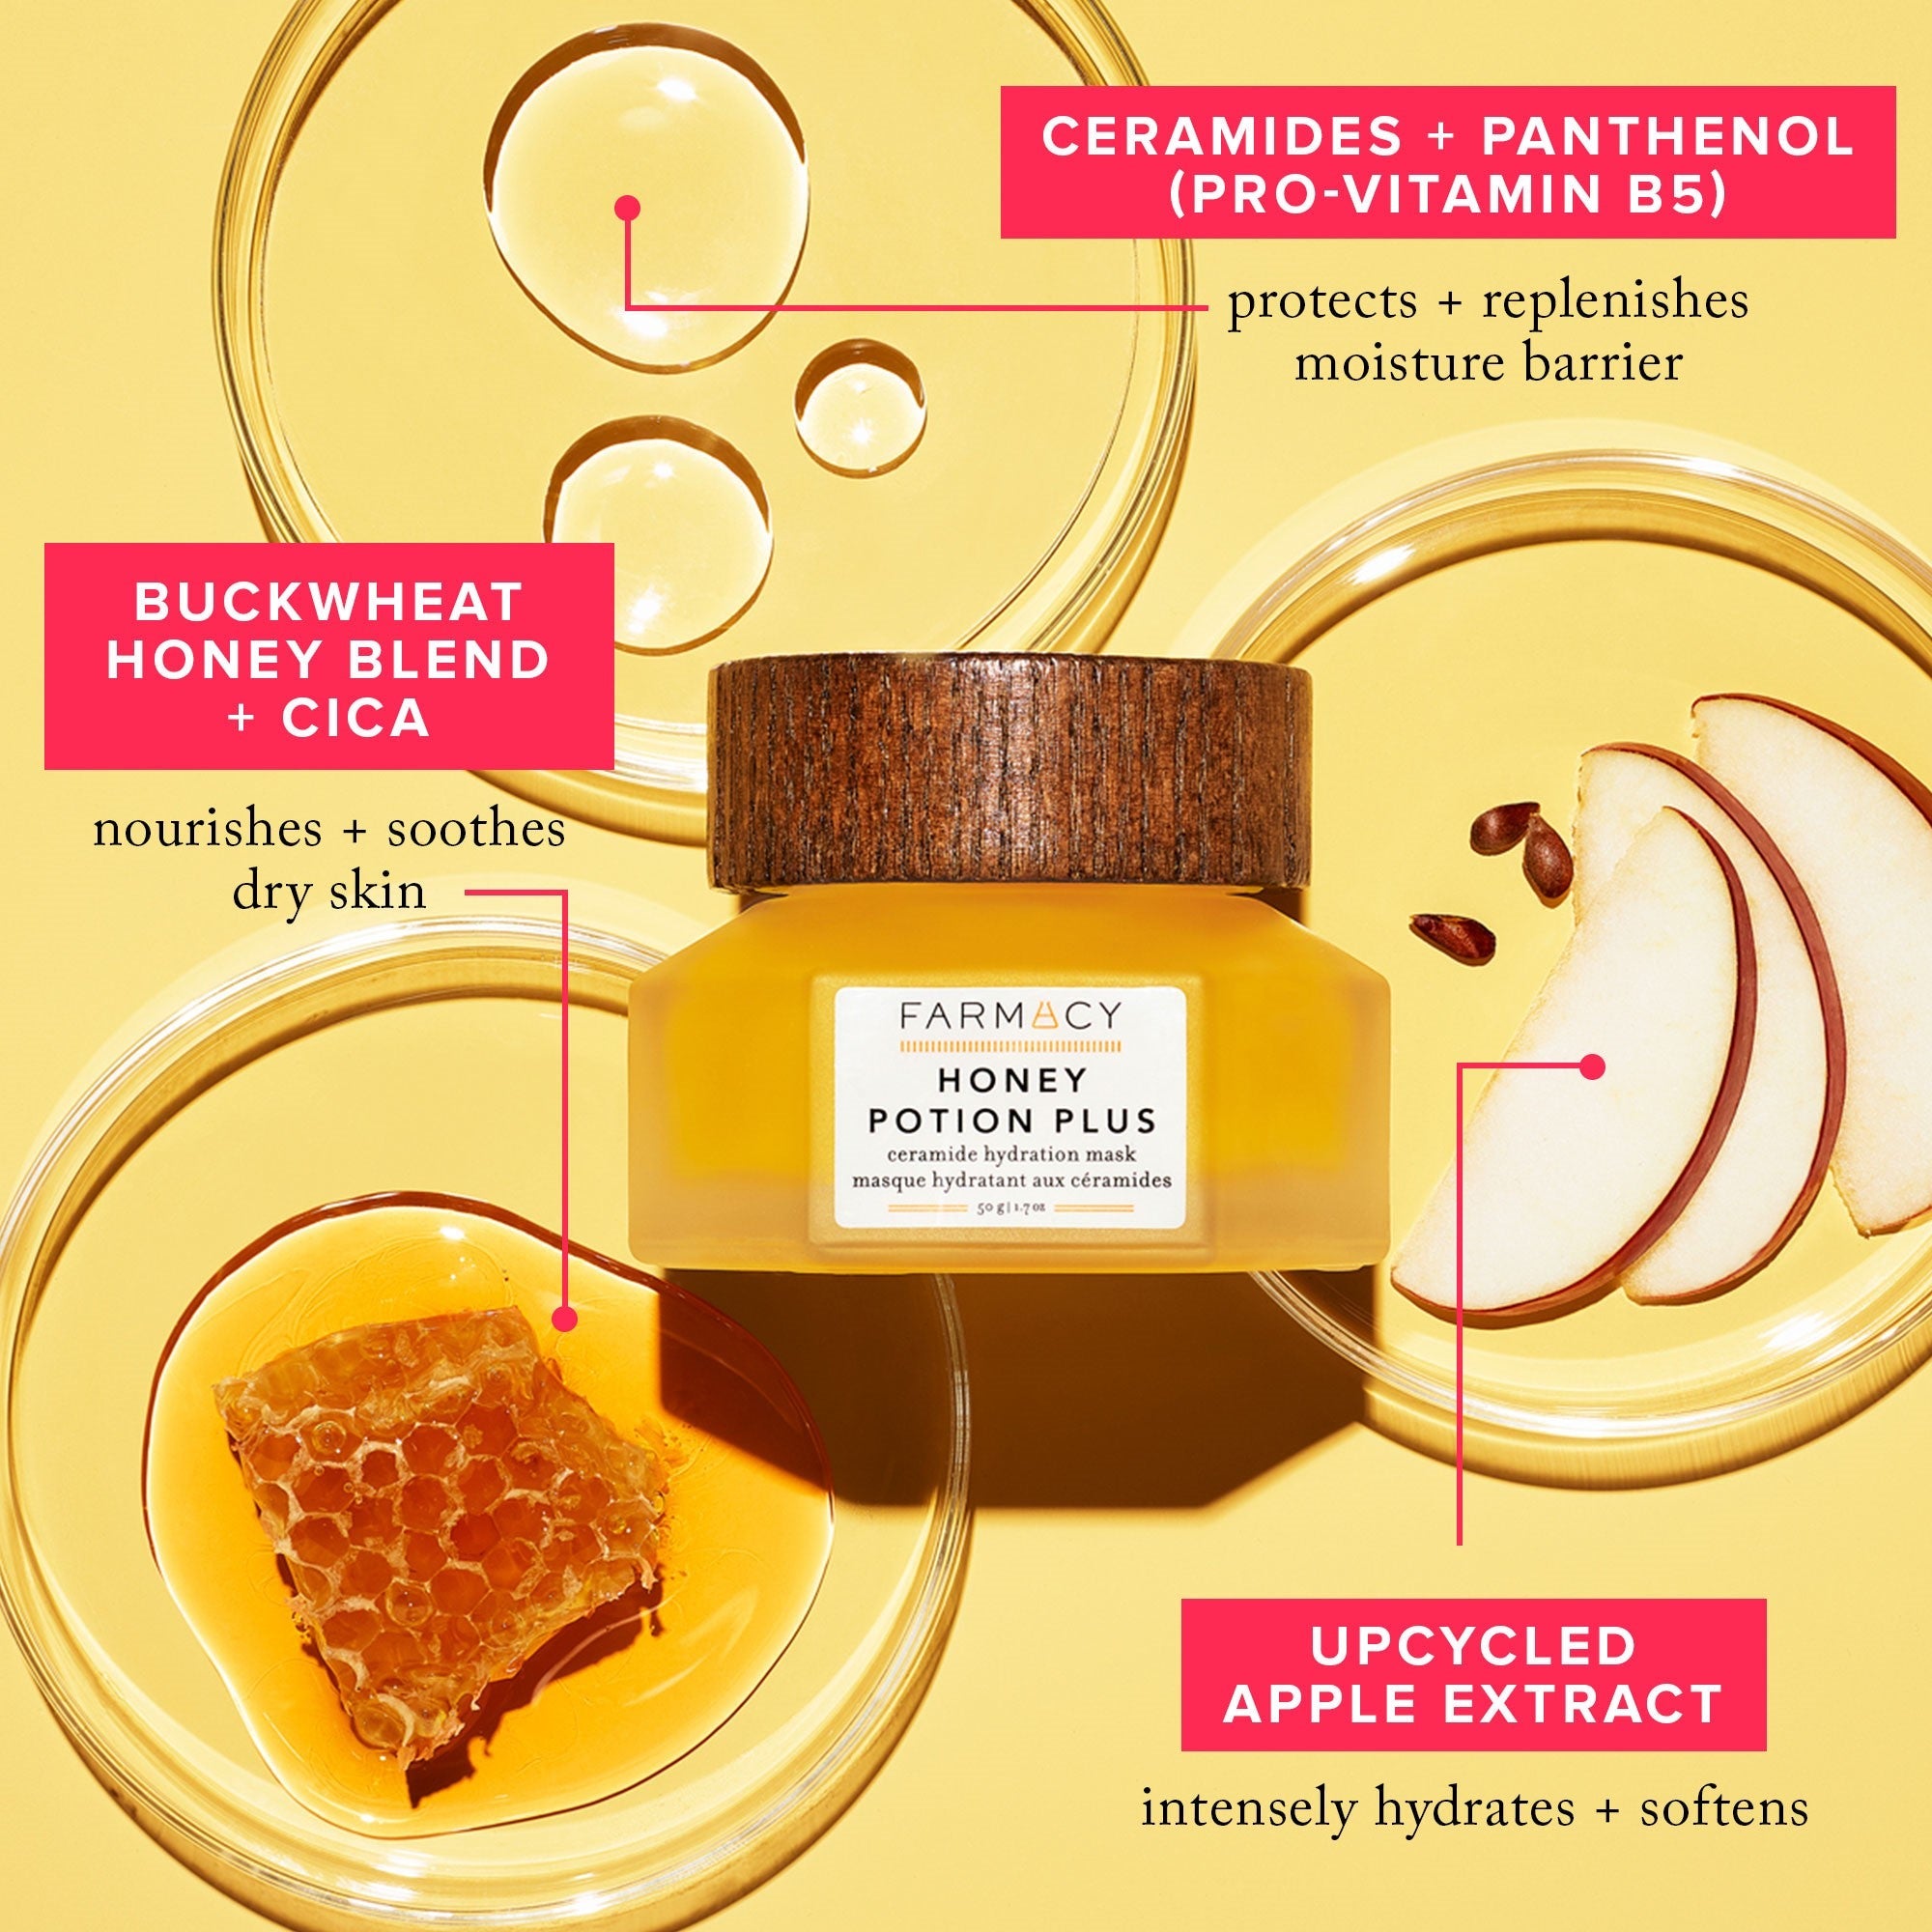 An infographic outlining the skin benefits of the Honey Potion Plus